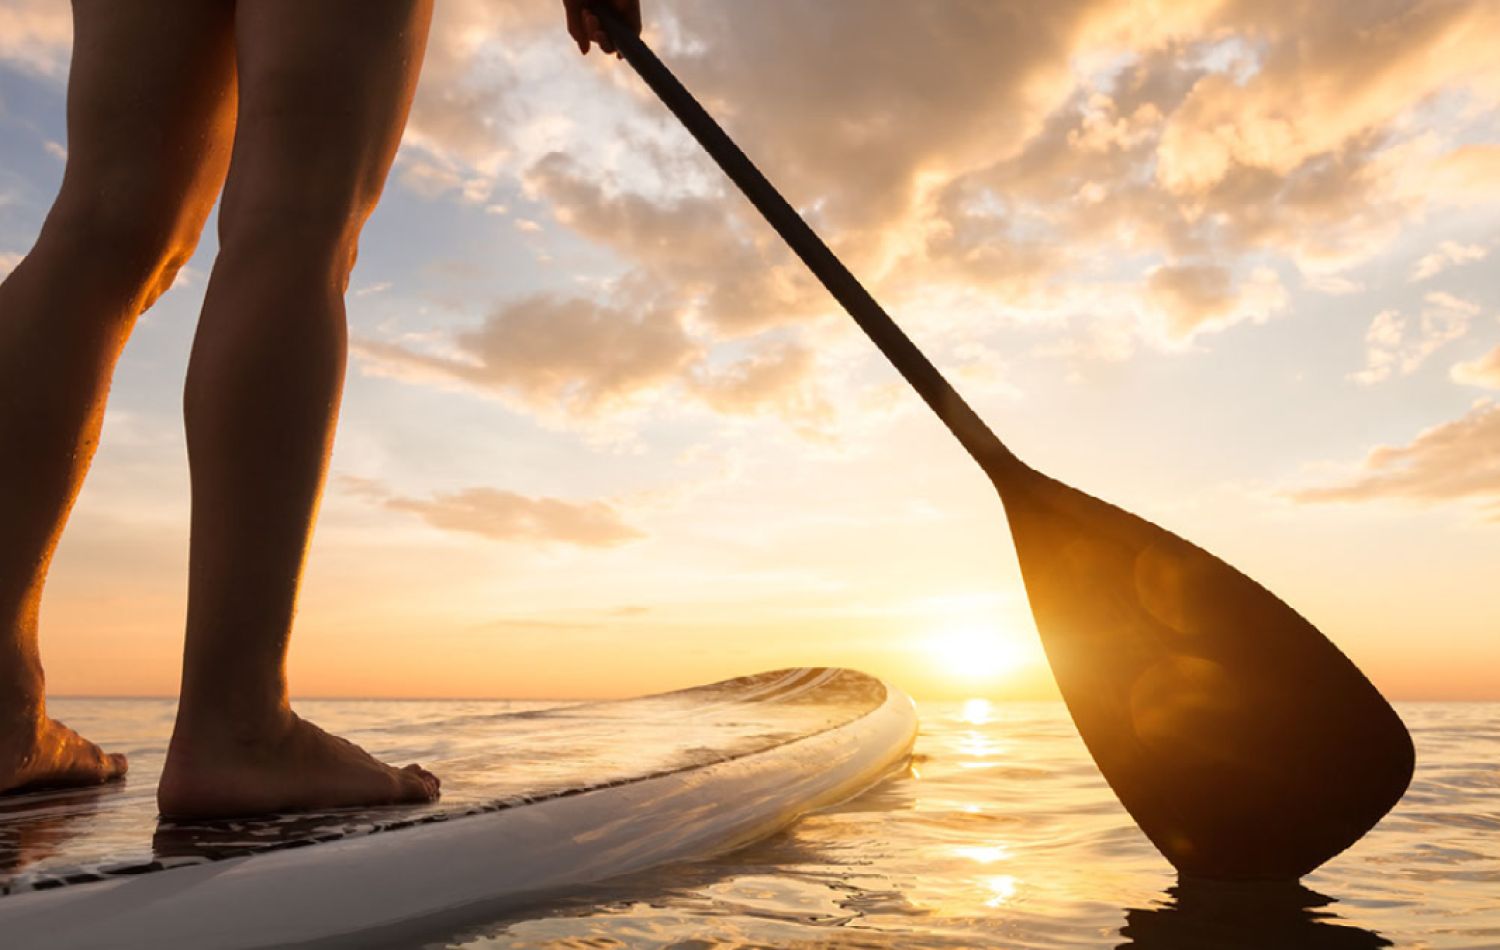 paddleboarding in the wash during sunset